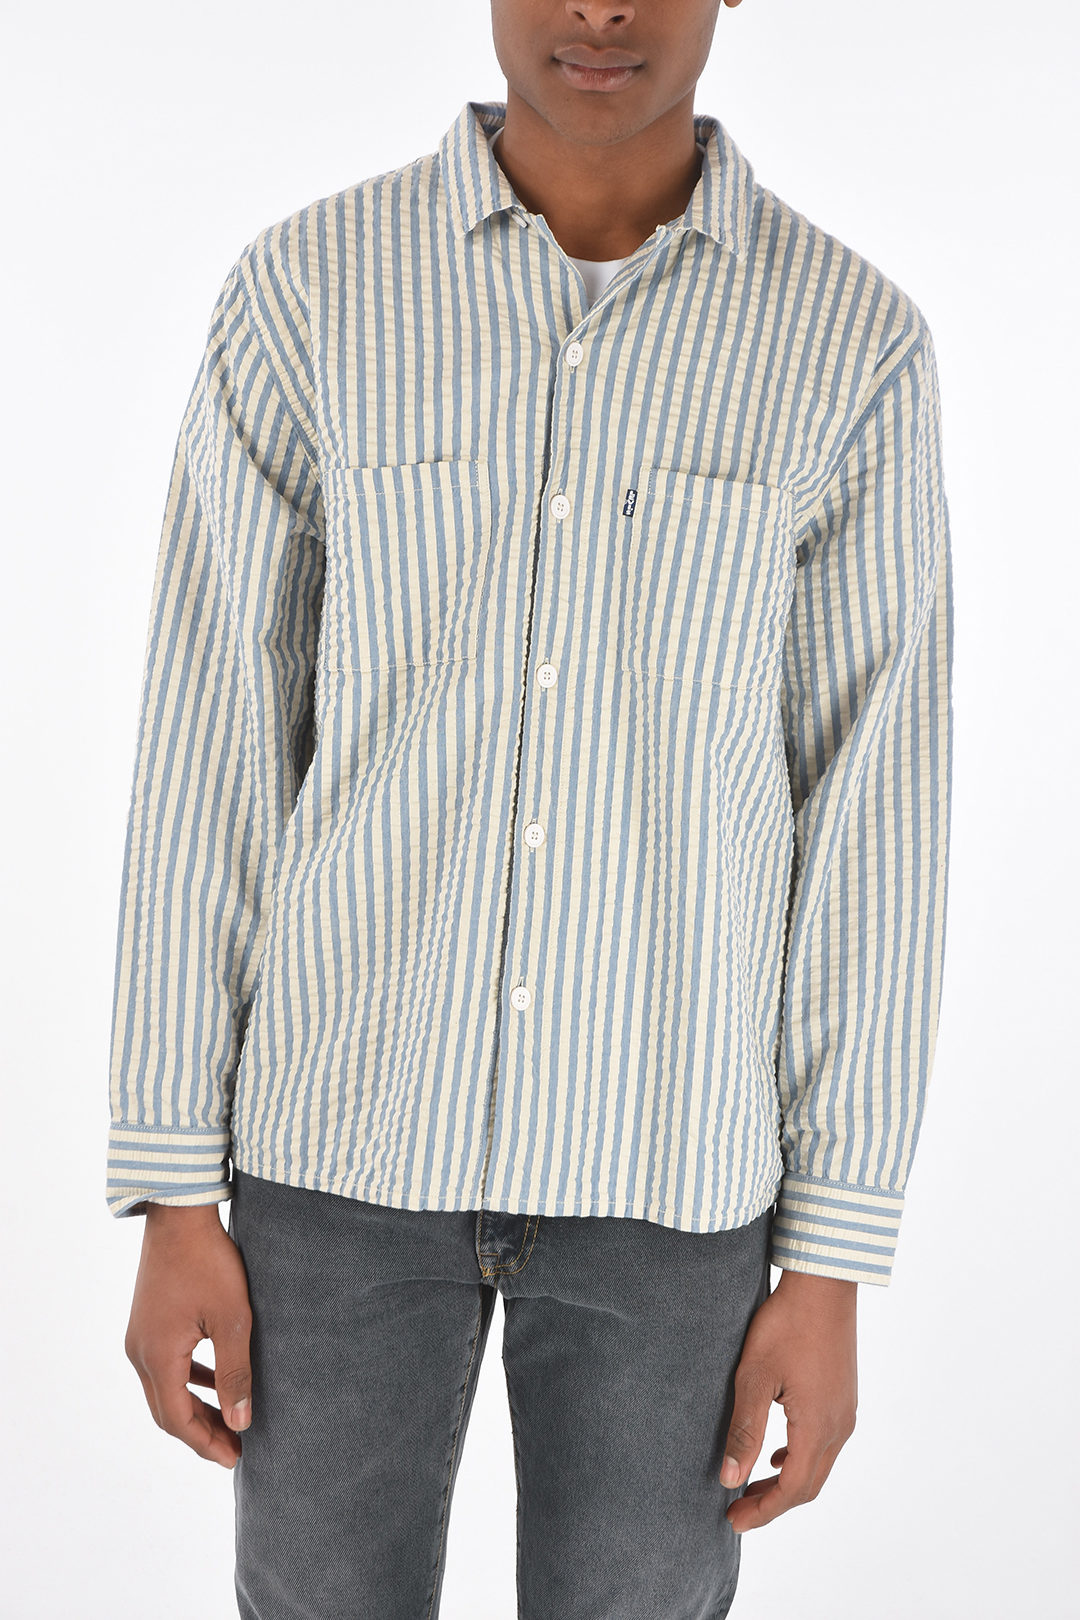 Levi's striped shirt with breast pockets men - Glamood Outlet